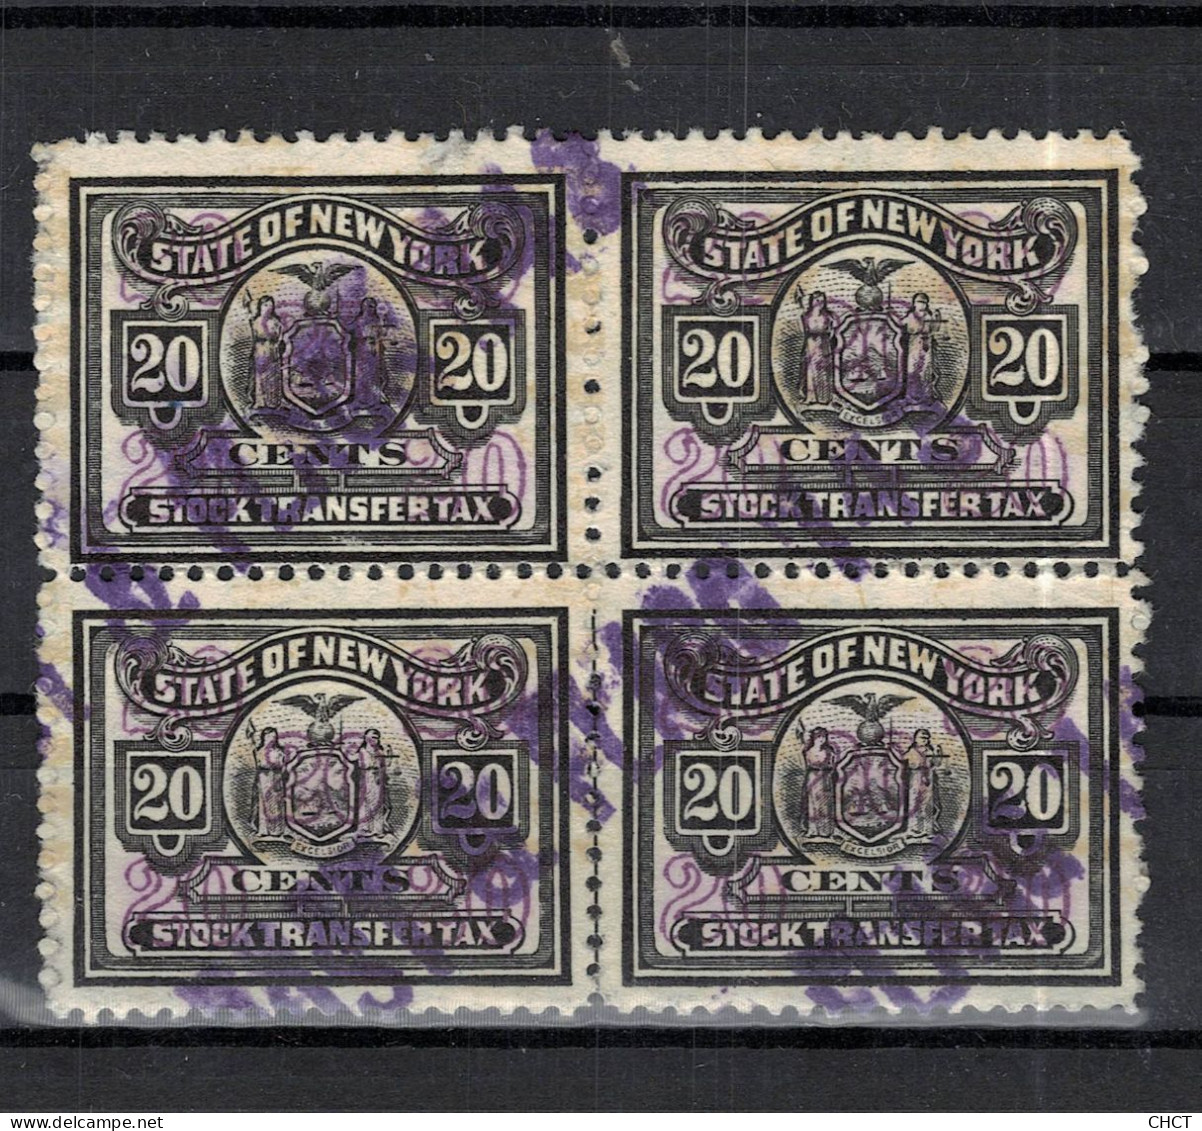 CHCT26 - State Of New York, Stock Transfer Tax Stamp, Block Of 4, America - Ohne Zuordnung